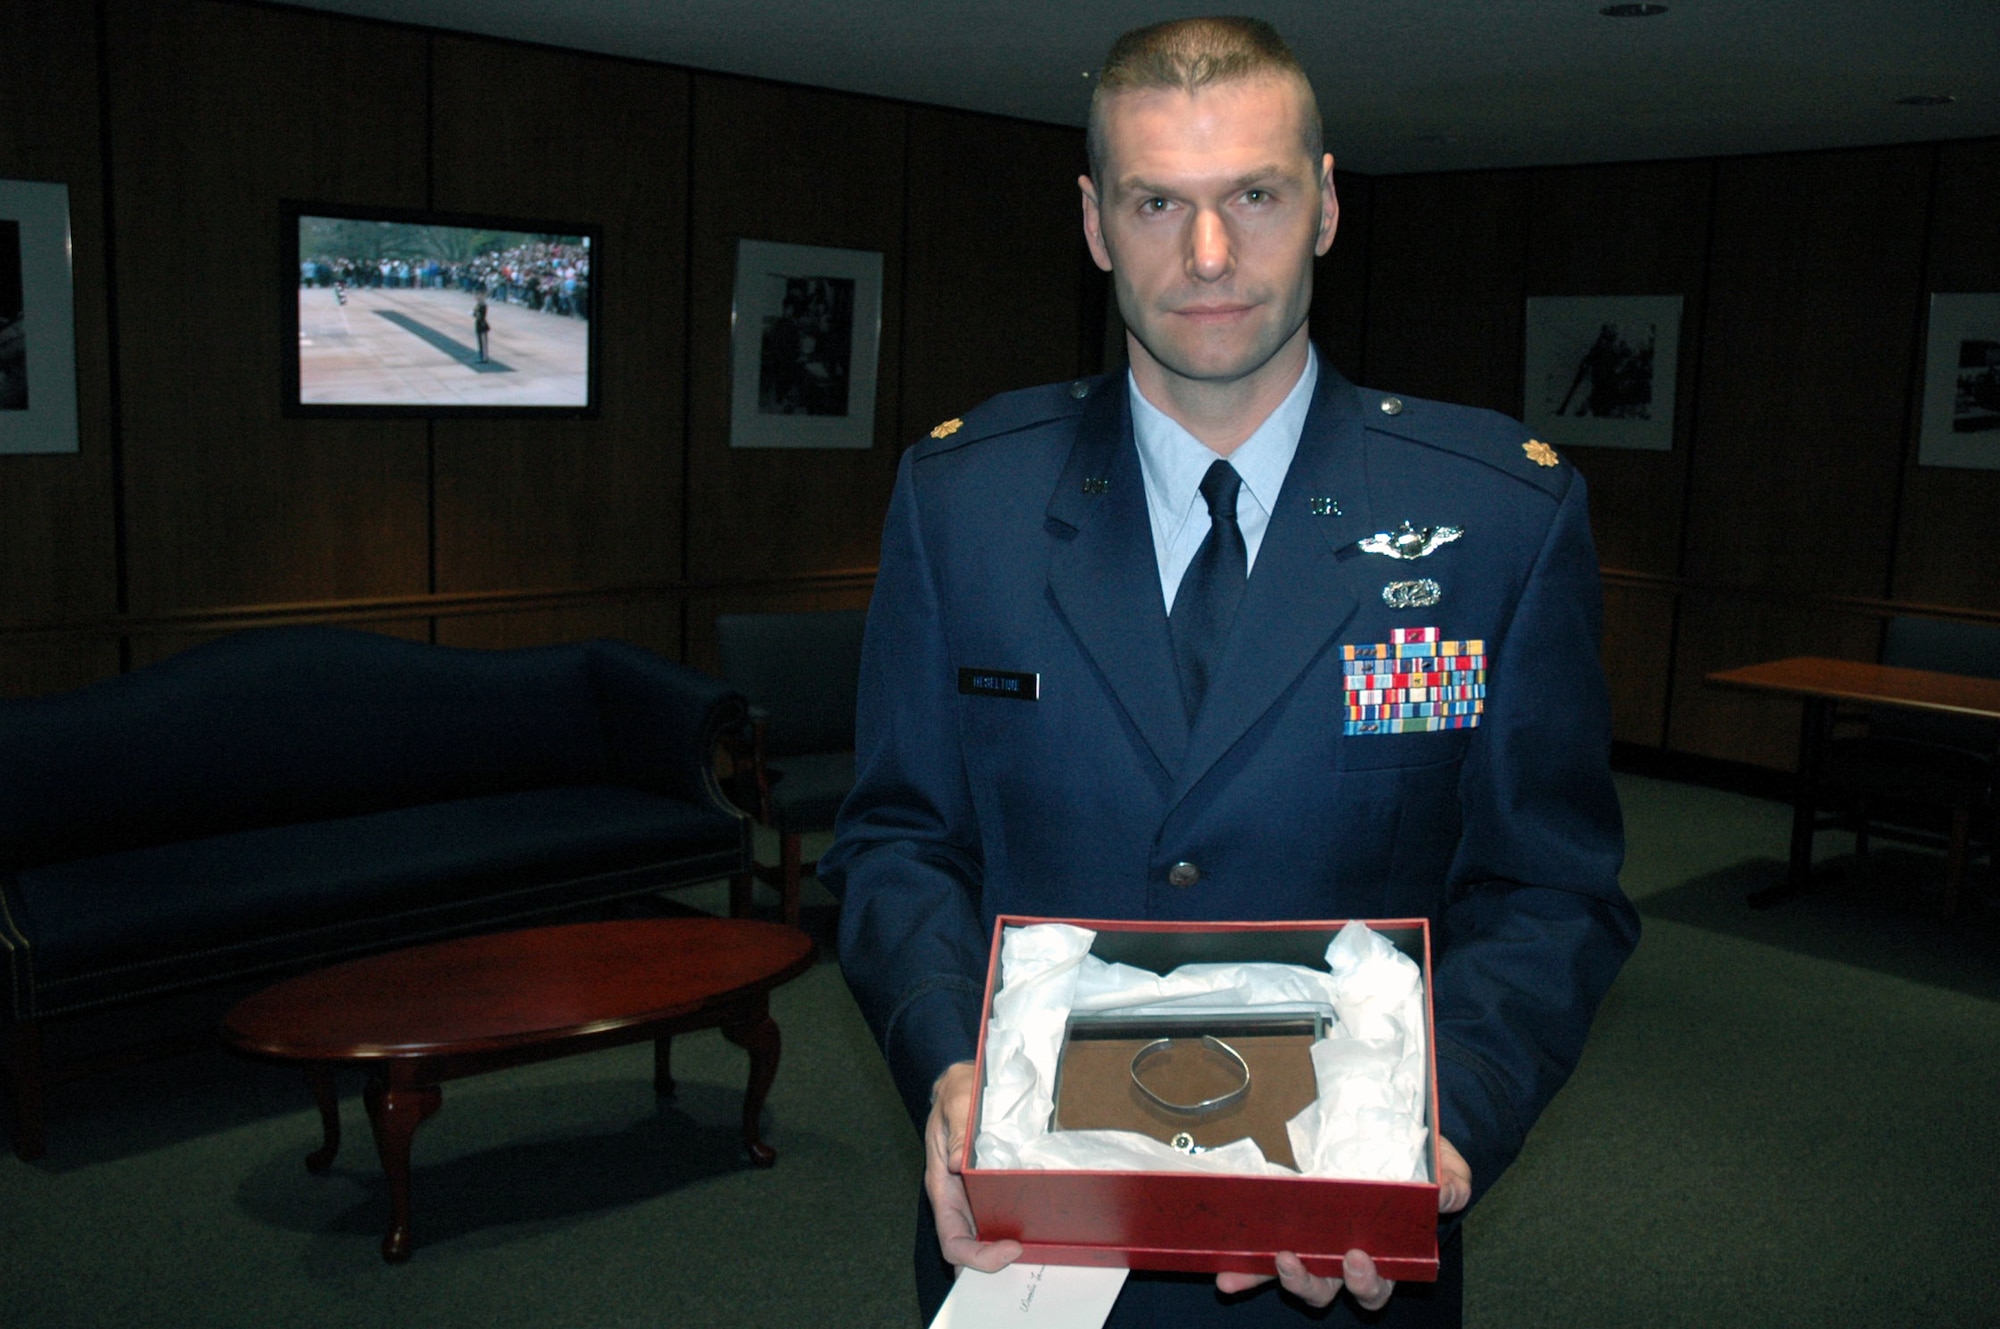 Maj. Phil Heseltine, U.S. Air Force Expeditionary Center executive officer to the commander, Fort Dix, N.J., shows the POW/MIA bracelet he wore for 18 years.  Major Heseltine presented the bracelet to the family of Maj. Robert F. Woods, whose name is on the bracelet, during the funeral for Major Woods at Arlington National Cemetery April 9, 2008.  (U.S. Air Force Photo/Tech. Sgt. Scott T. Sturkol)